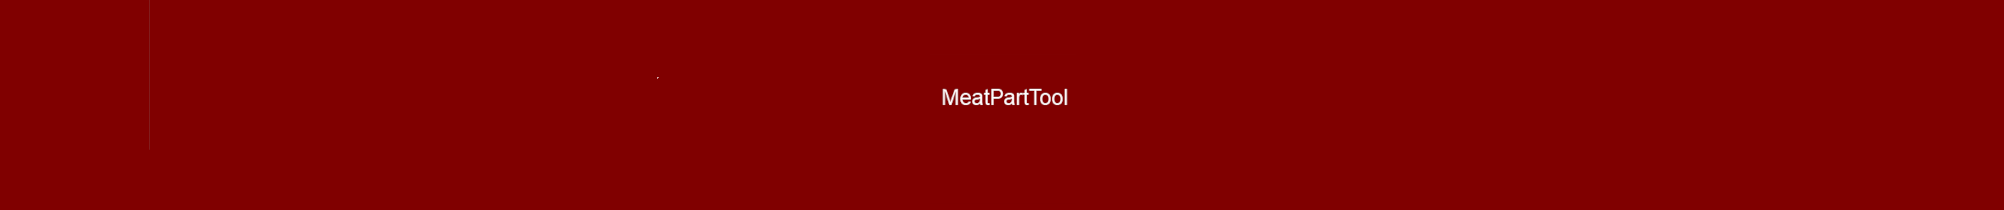 The MeatPart Tool software